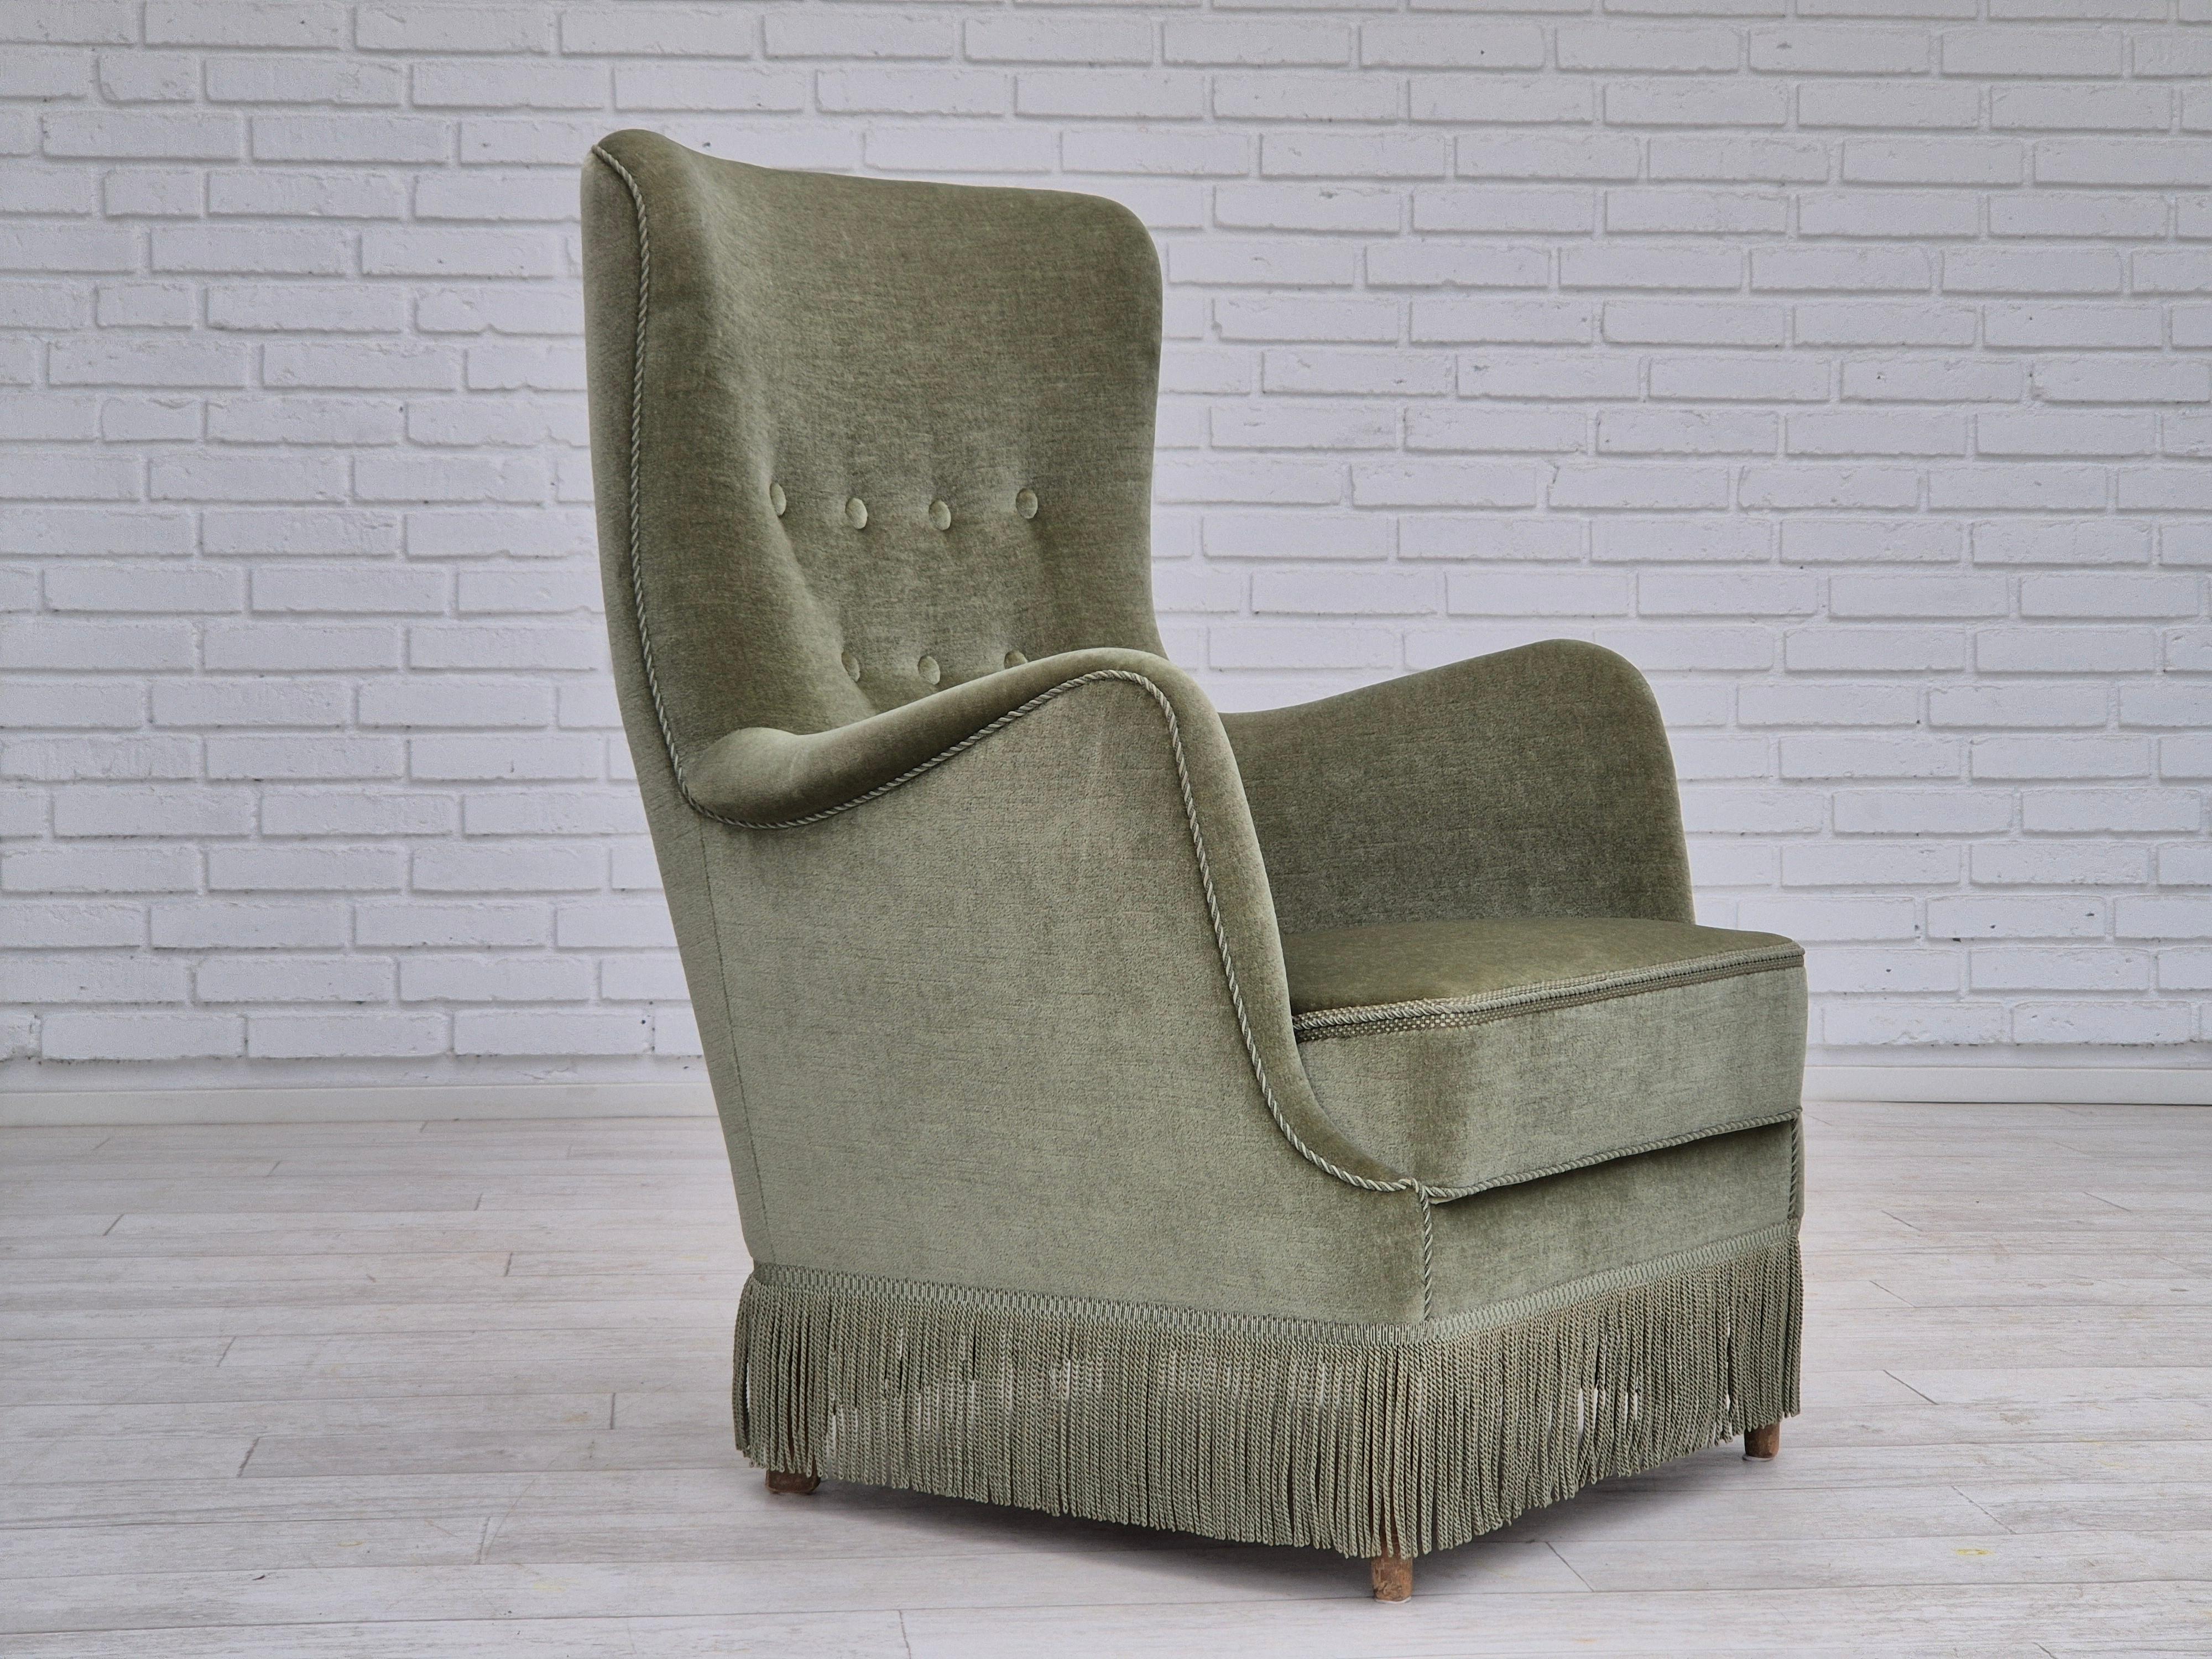 1970s, Danish armchair in original excellent condition. Used not too much from the 1970s. Light green furniture velour, beech wood legs. Springs in the seat. Manufactured by Danish furniture manufacturer in about 1970-75s. Chair comes directly from